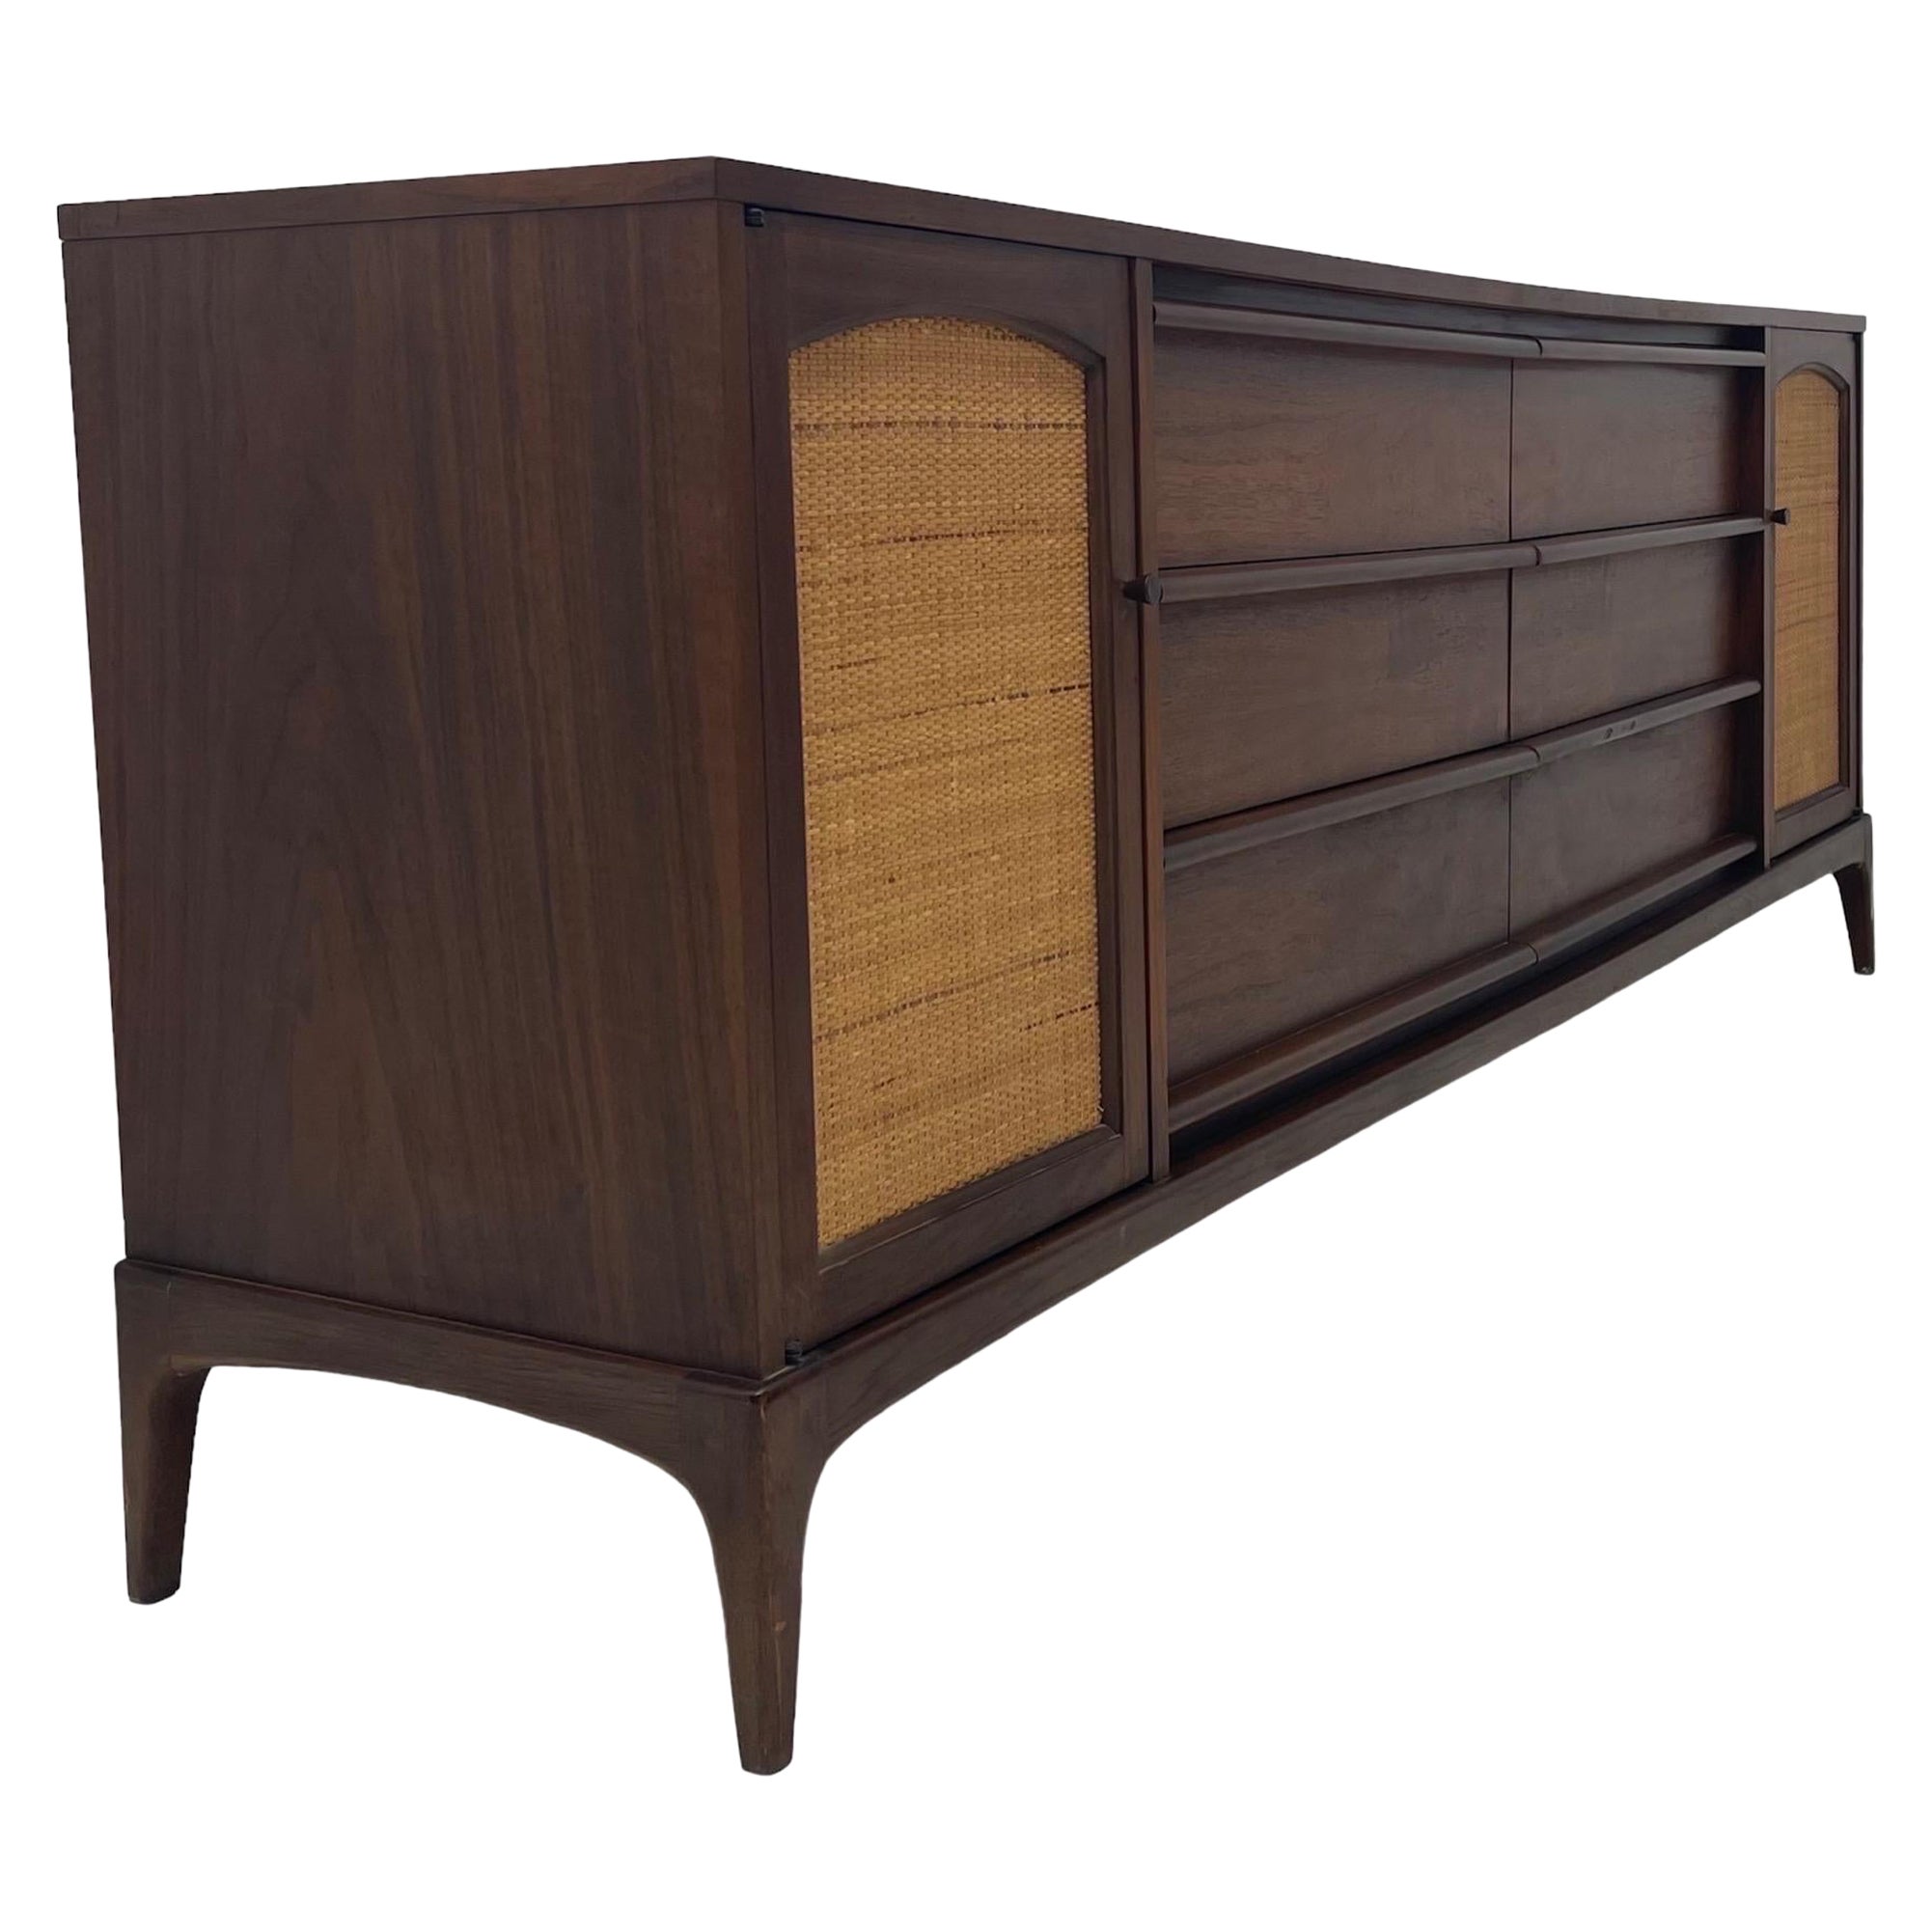 Vintage Mid-Century Modern Credenza Cabinet Dovetail Drawers For Sale